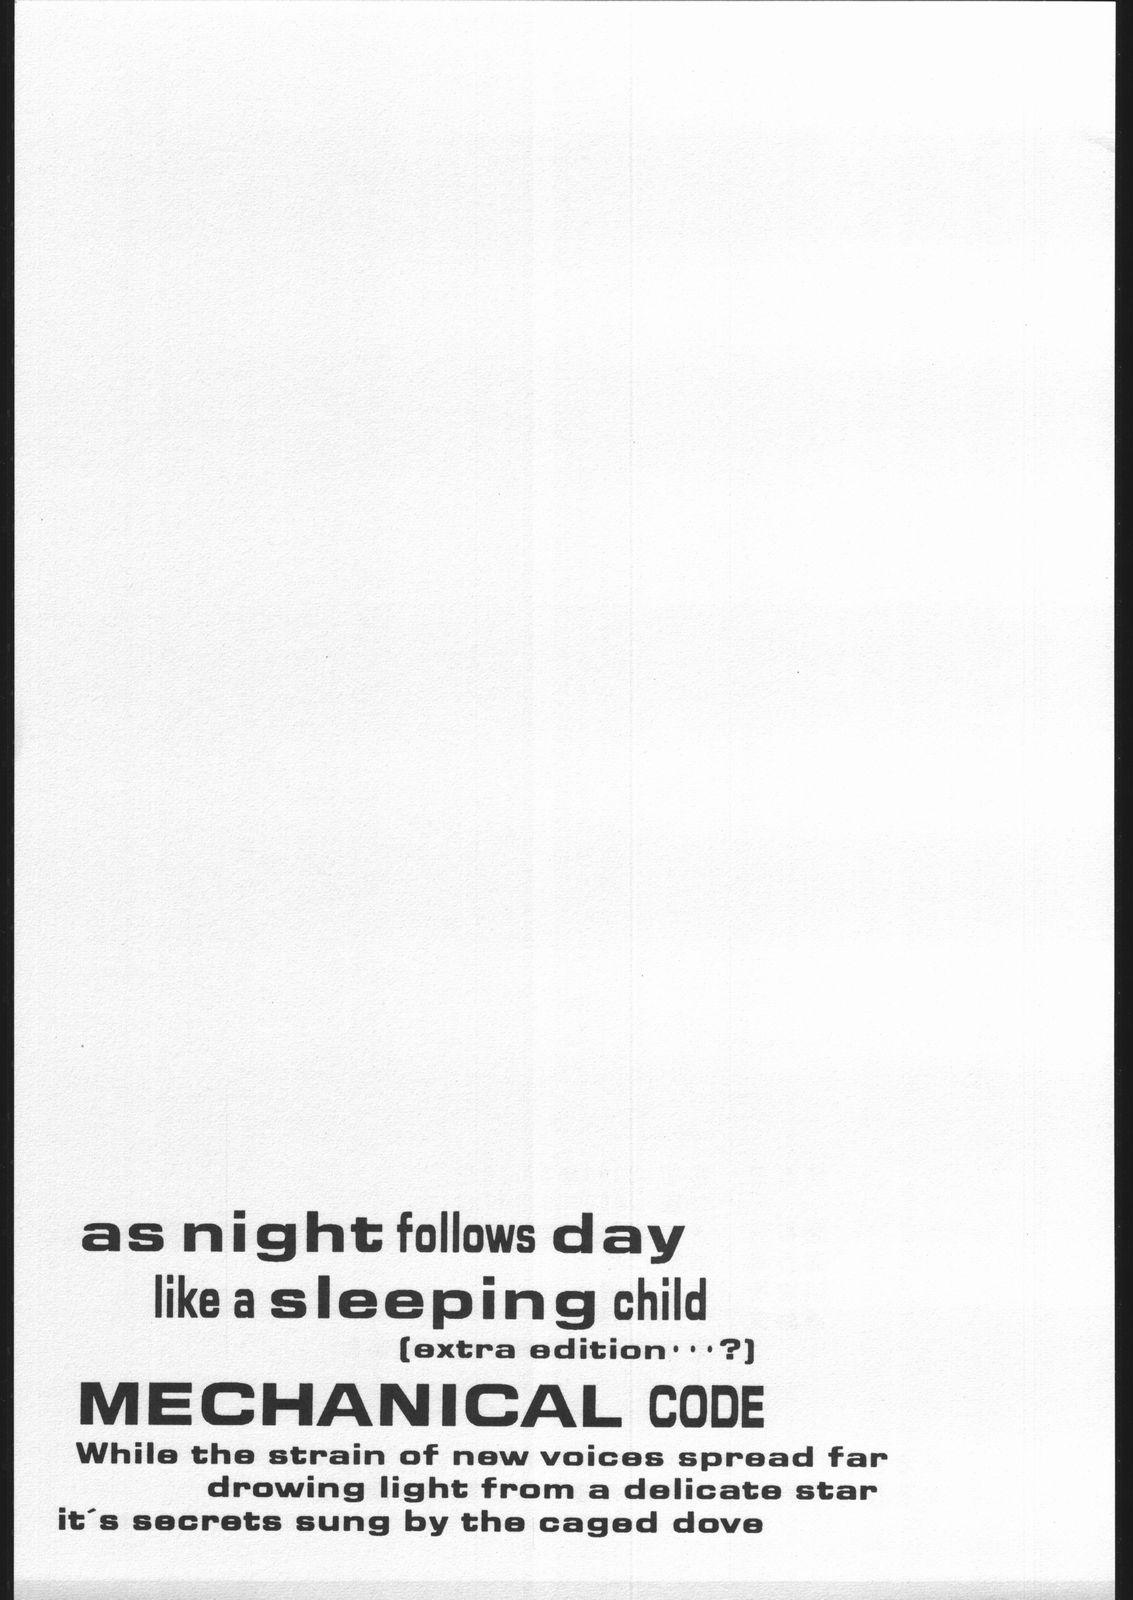 Sexy Whores AS NIGHT FOLLOWS DAY like a sleeping child - Ah my goddess Skinny - Page 16